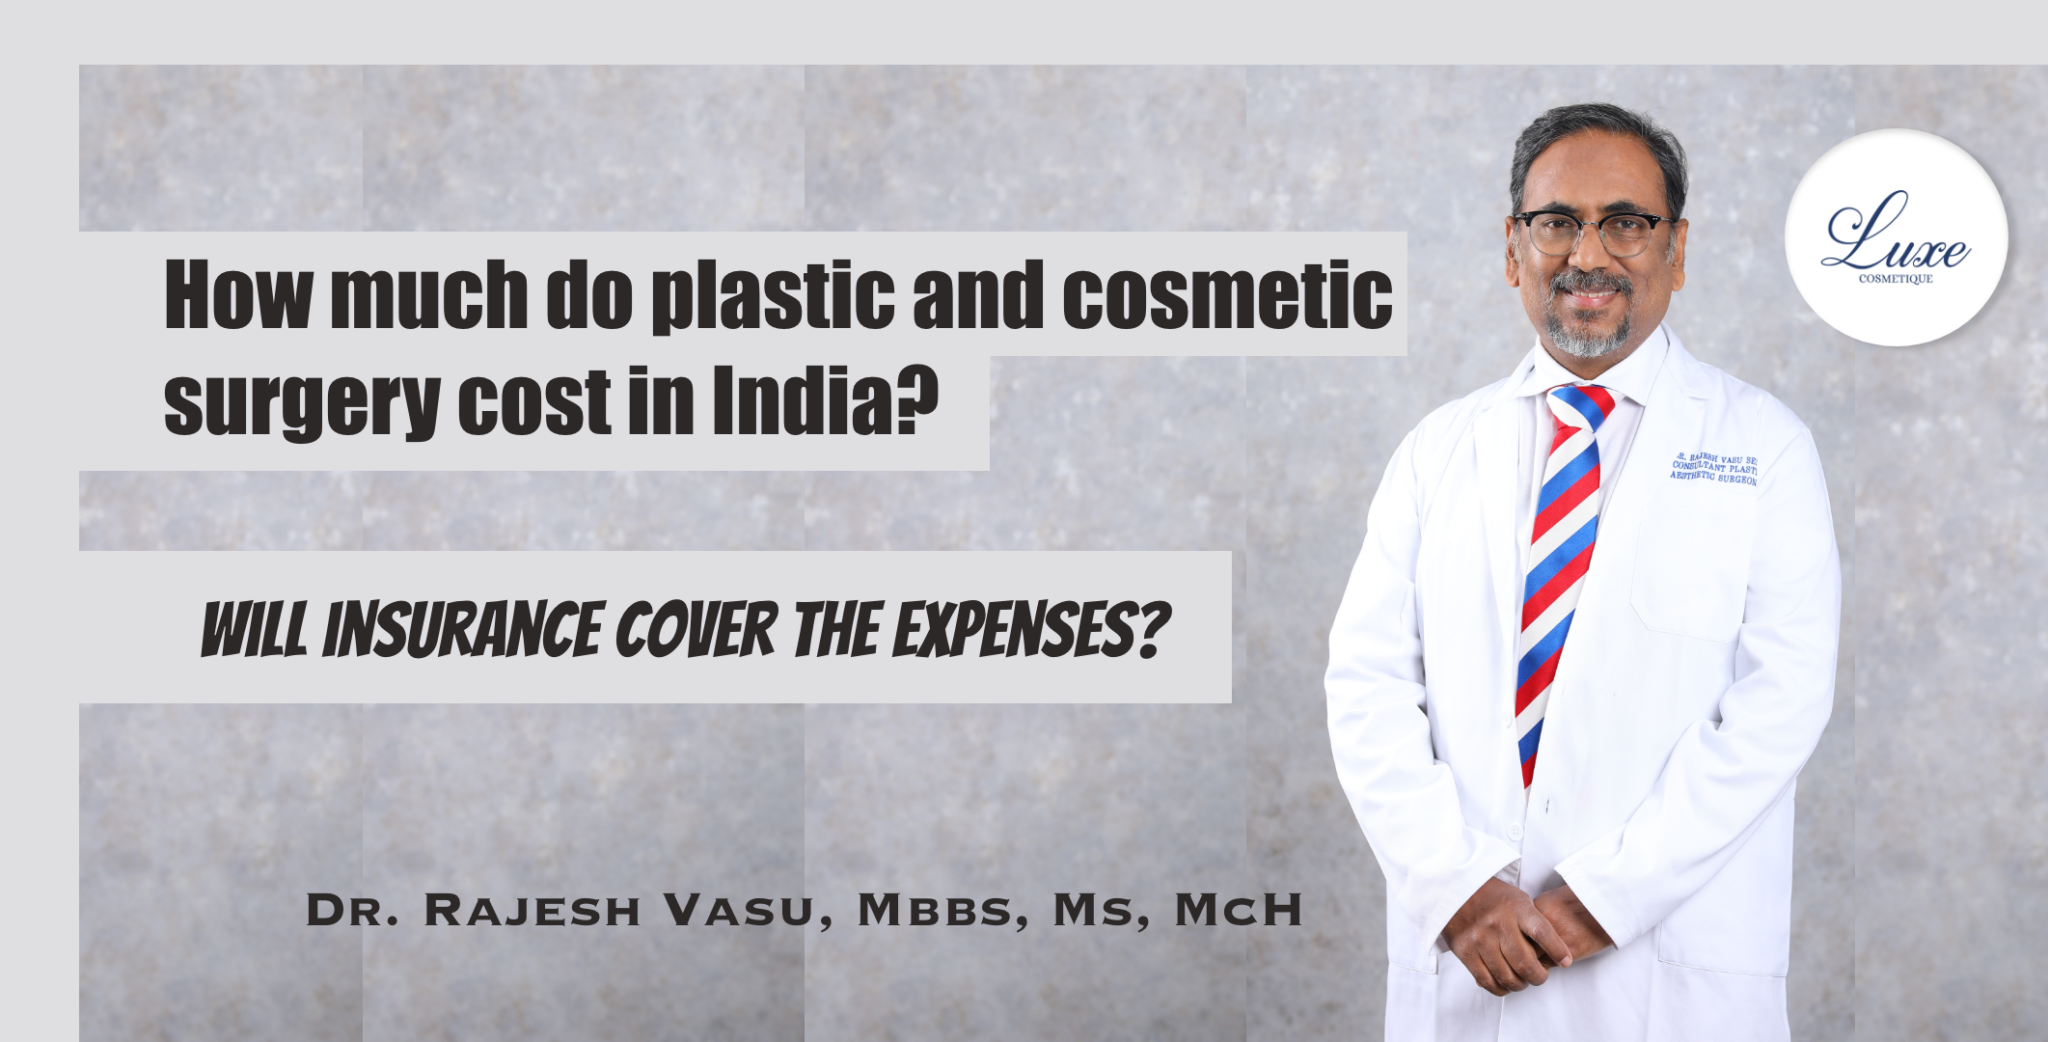 How much do plastic and cosmetic surgery cost in India?